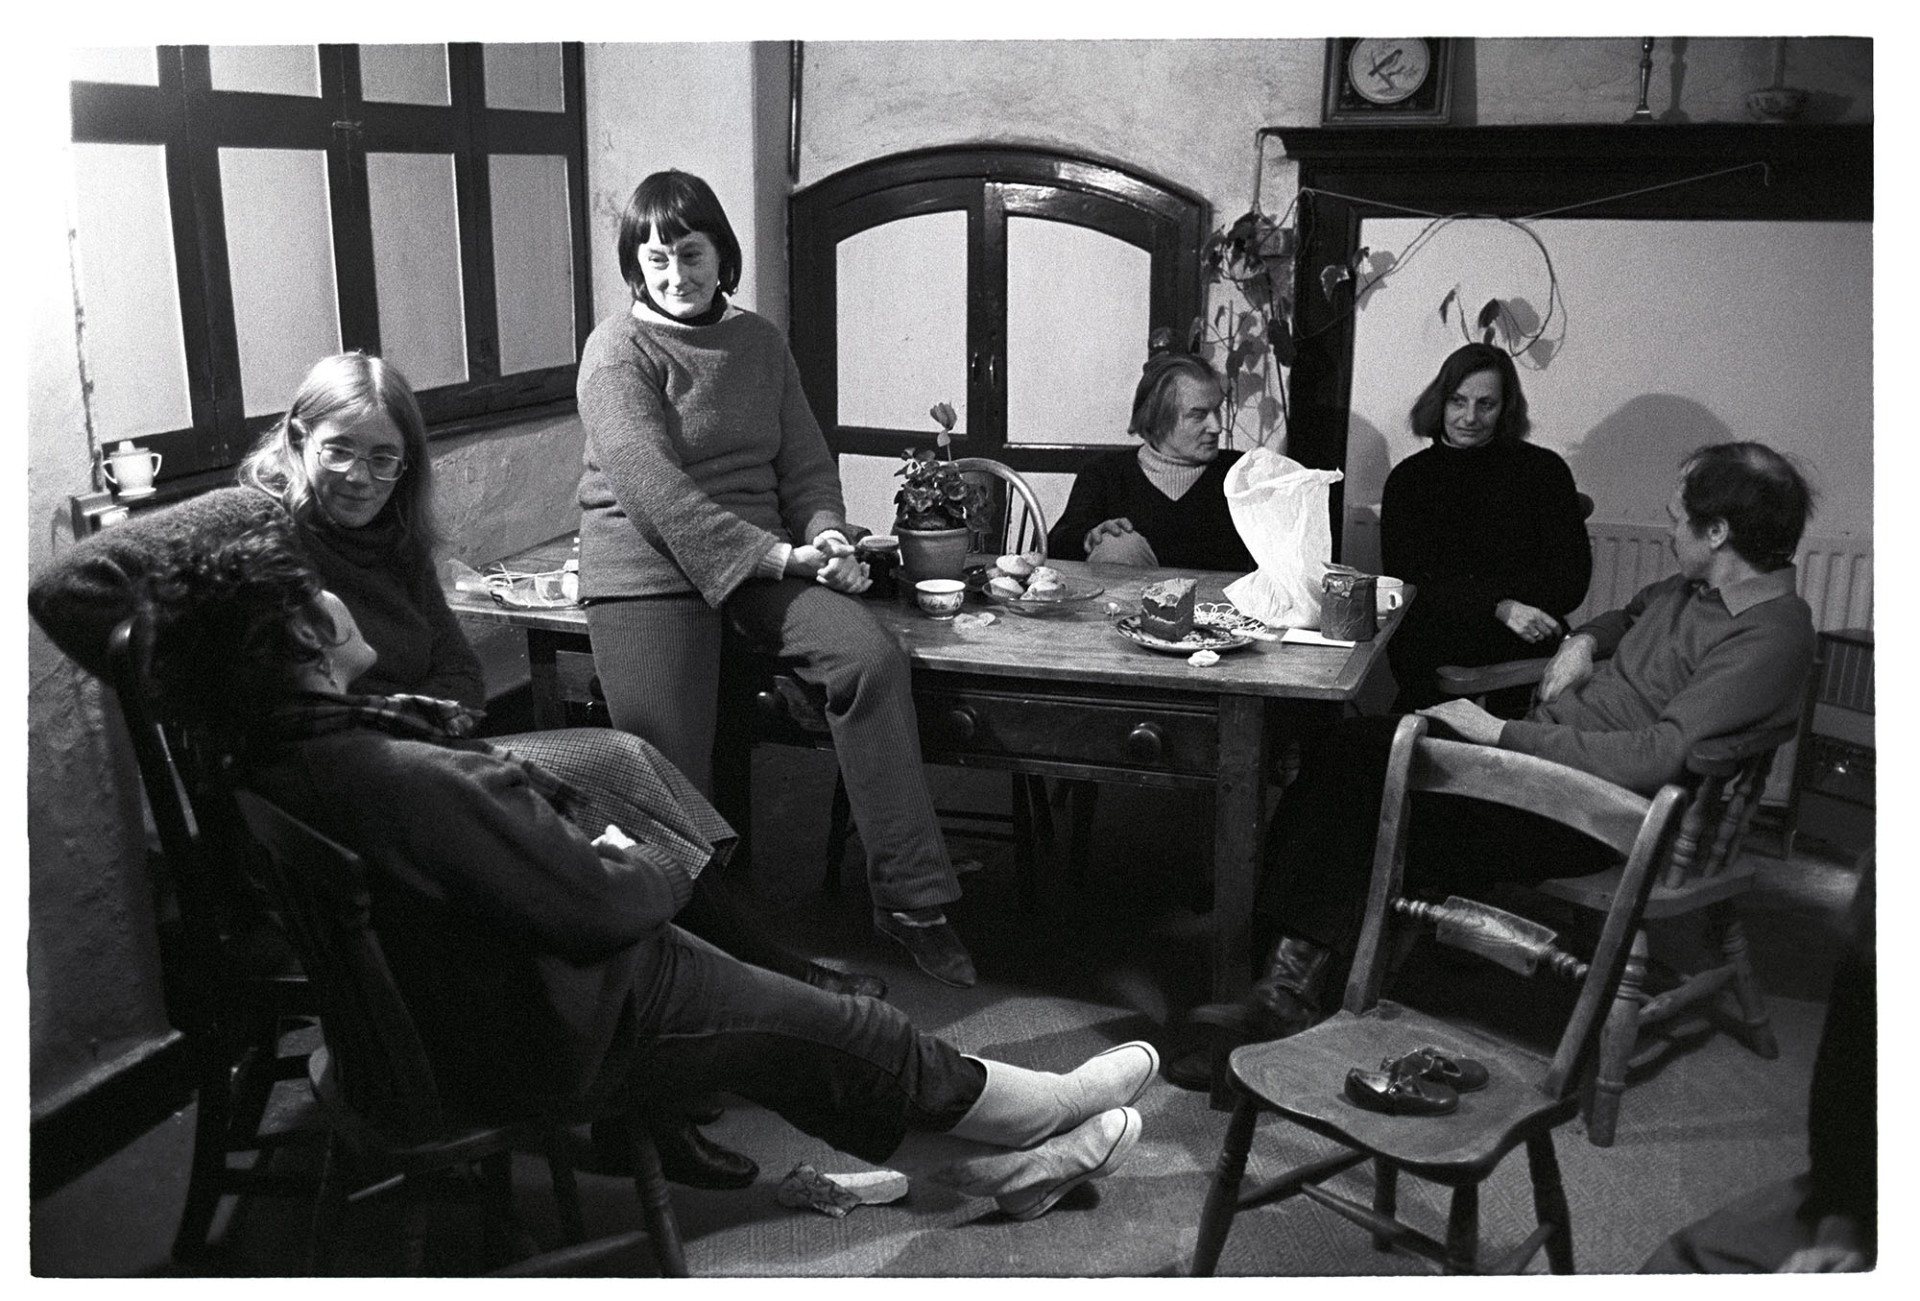 Family having tea and chat in kitchen of country house. <br />
[Men and women from the Furse family having tea and cake at a table in a partially wood panelled room in Halsdon House, Dolton. Left to right: John Furse; Frances Whistler; Theresa Whistler (nee Furse); Patrick Furse; Antonia Furse (wife of Patrick); Andrew Harvey, musician in residence at Beaford Centre.]